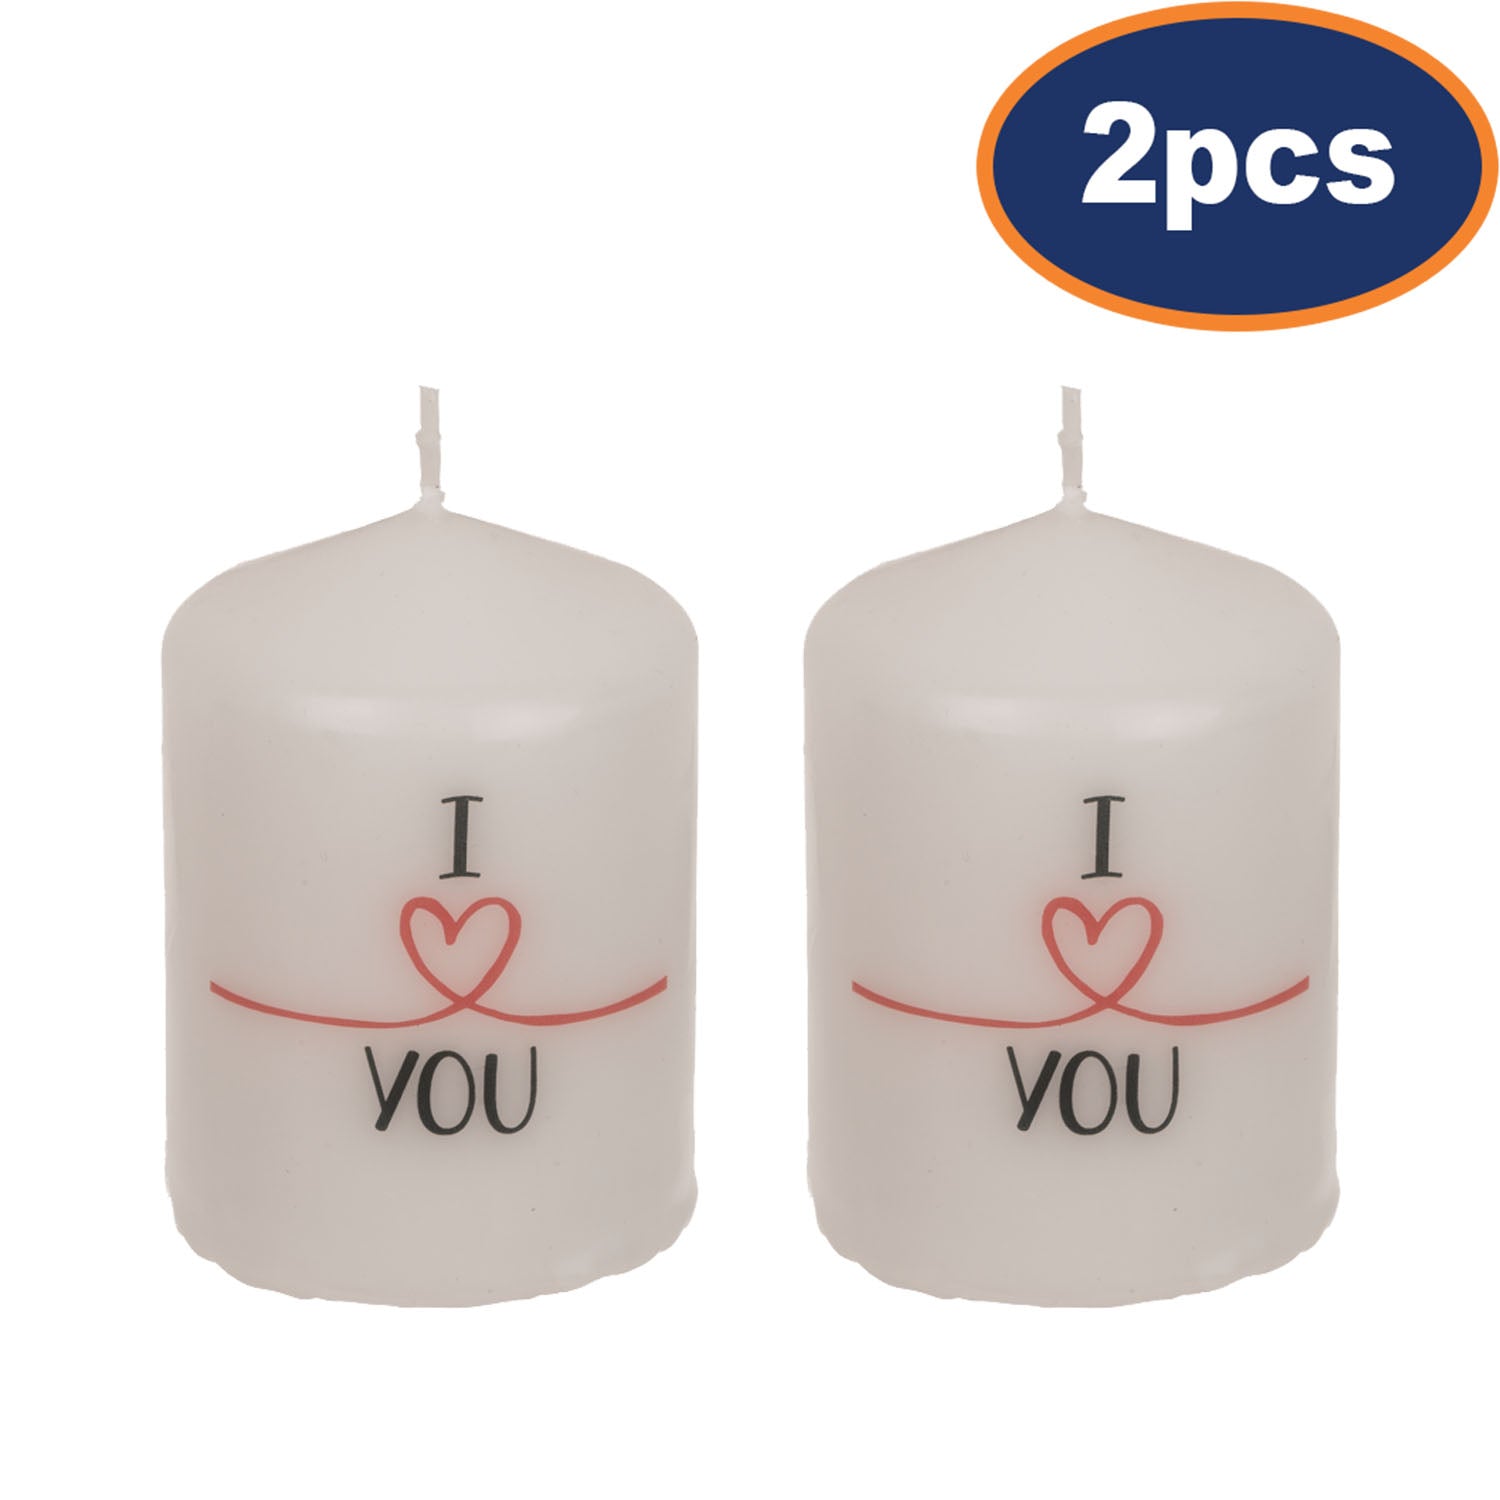 2Pcs White I Love You Unscented Pillar Candle